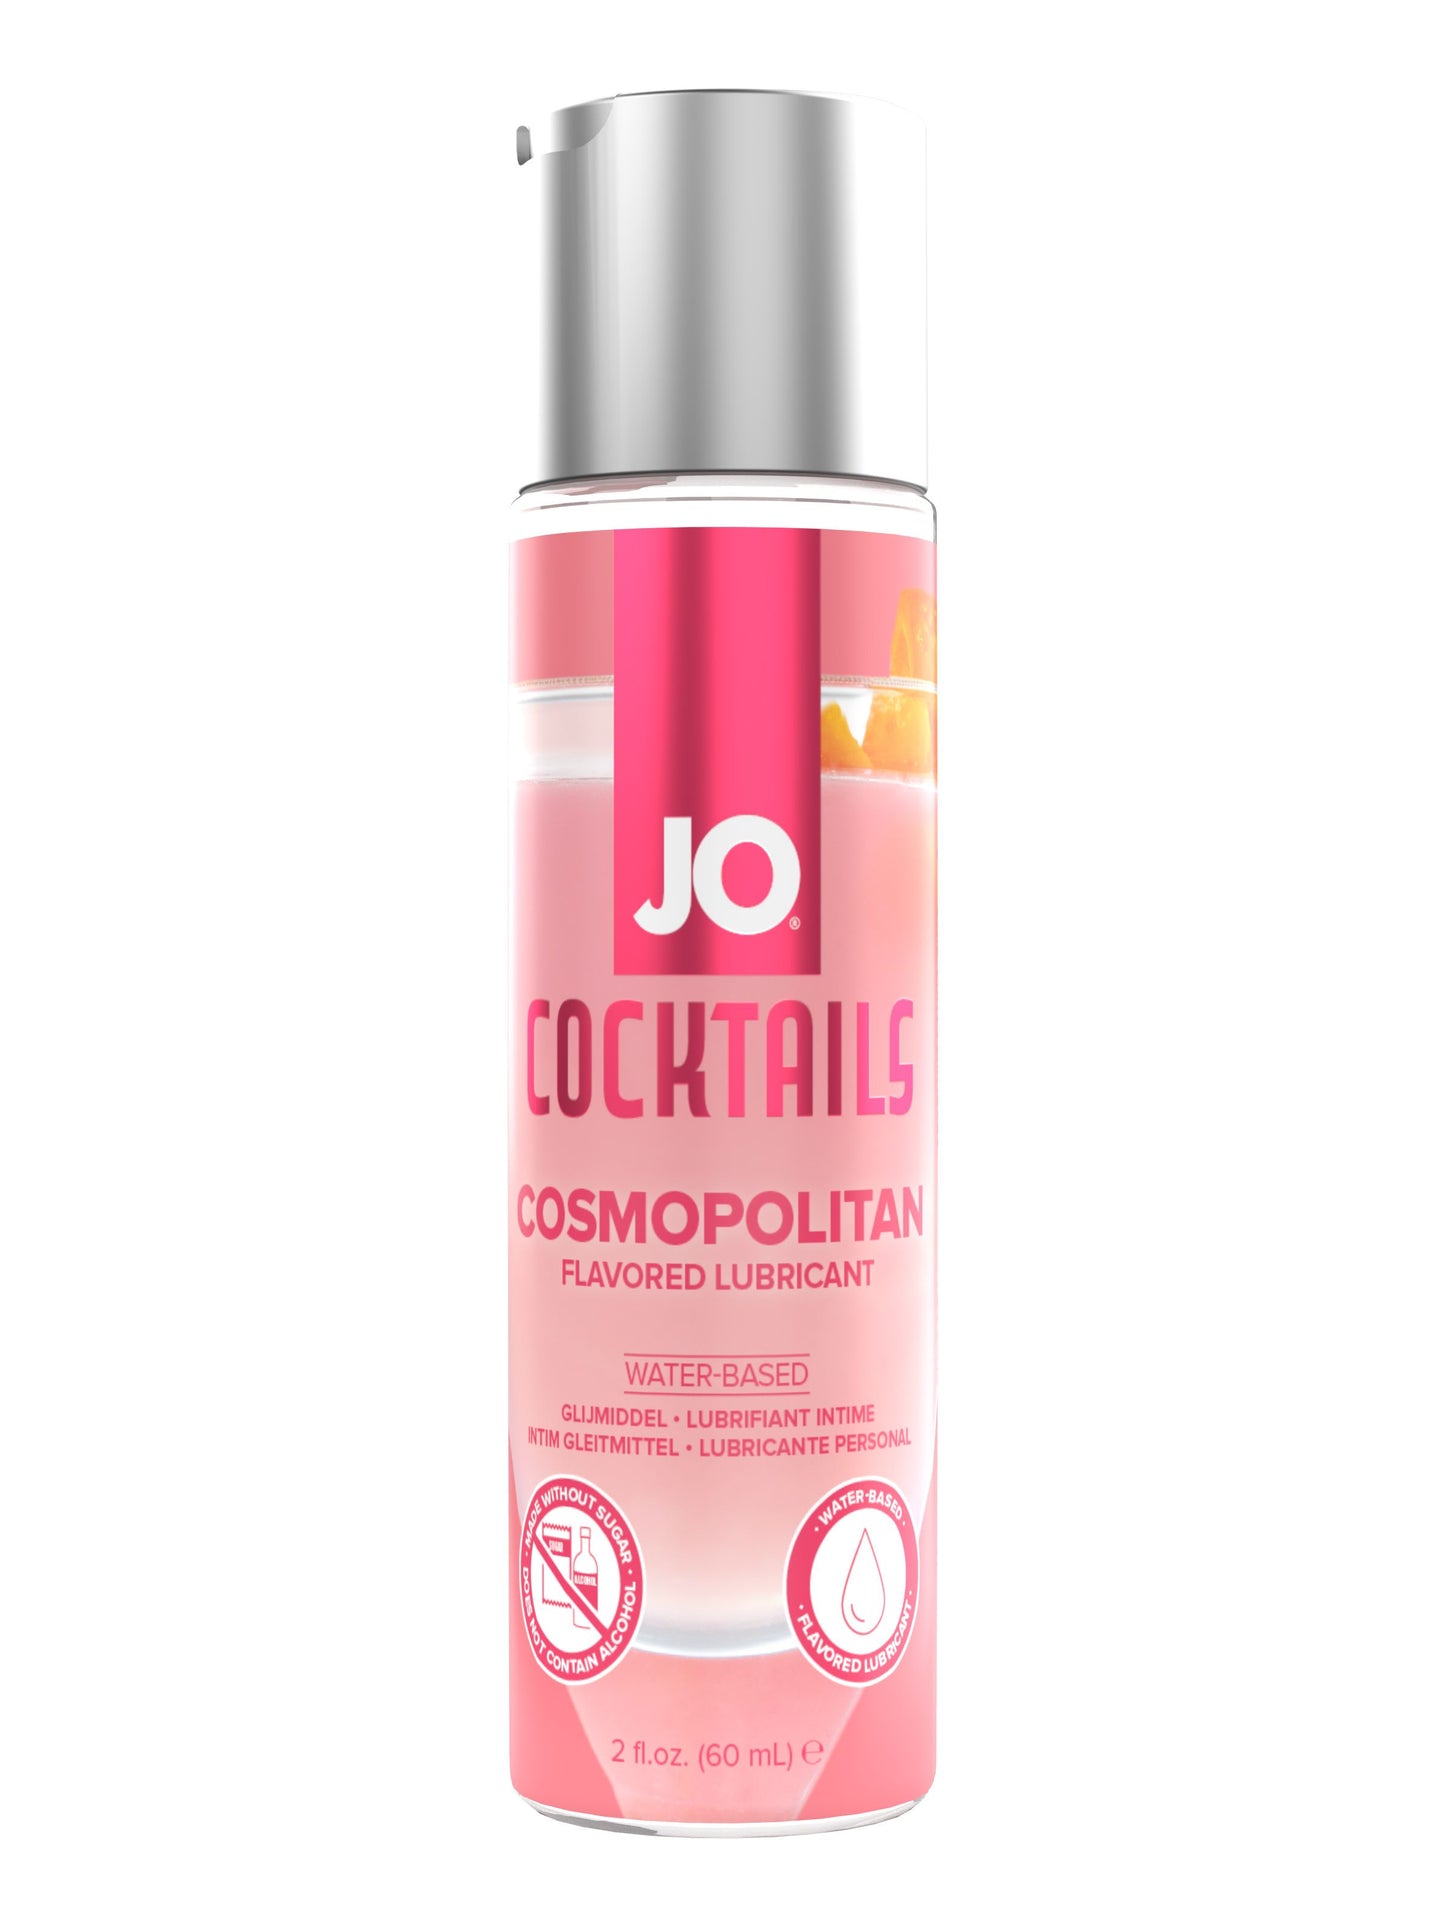 JO Cocktails Lubricant